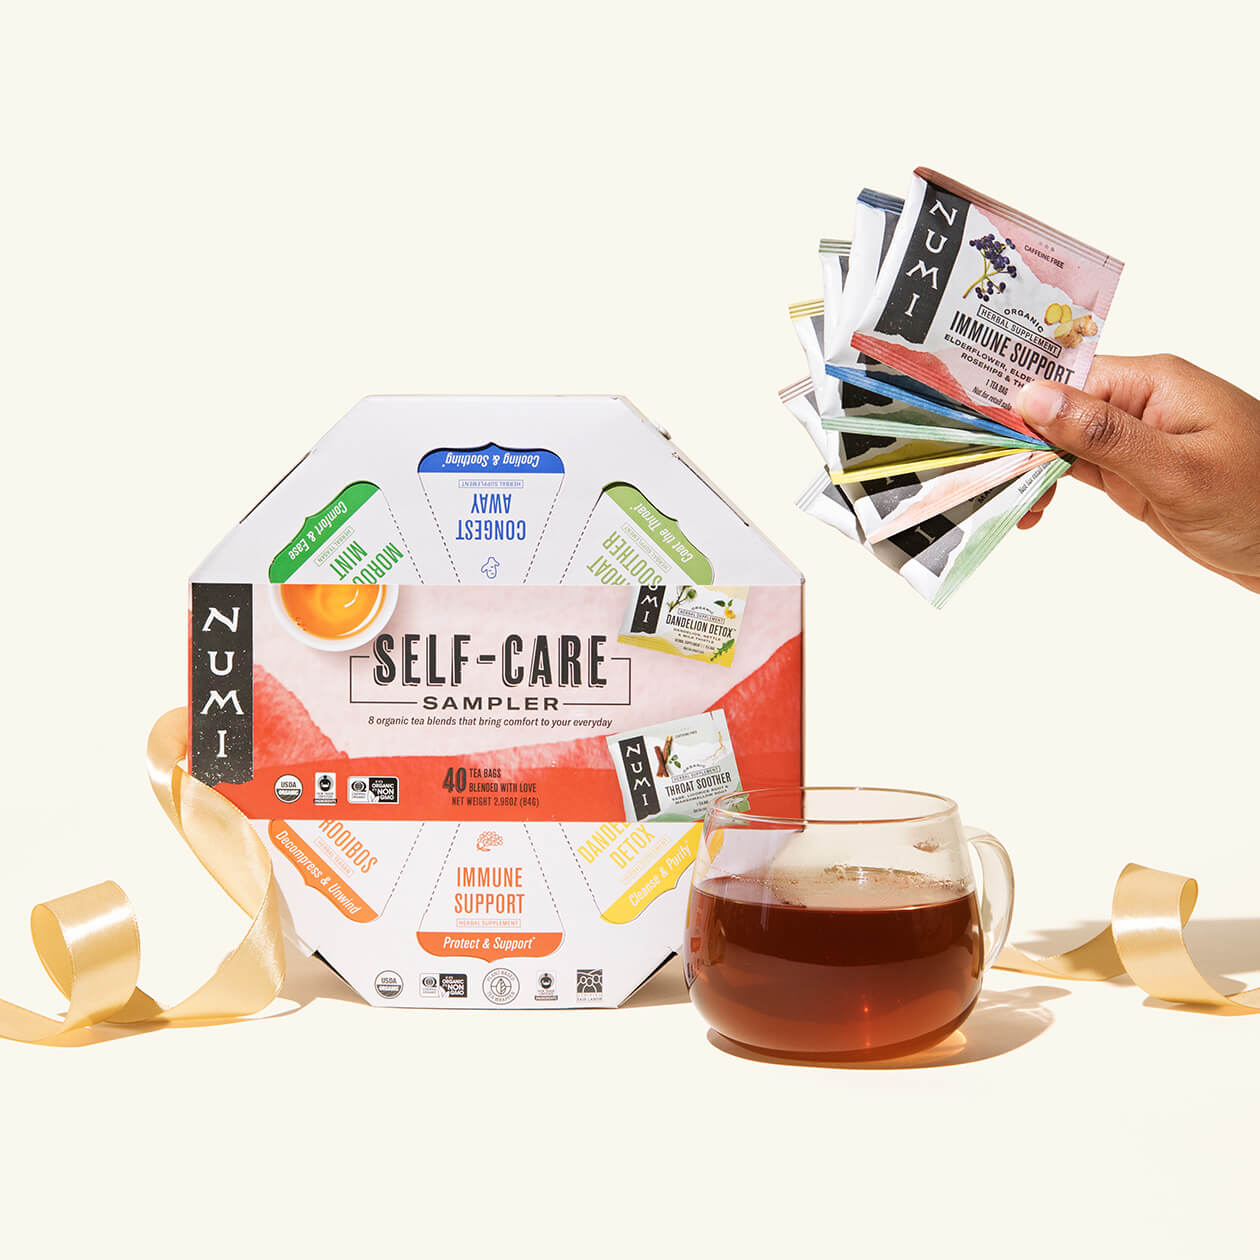 A Numi Self-care Sampler gift with a ribbon, a cup of brewed tea, and a person holding the variety of tea bags that come in this gift